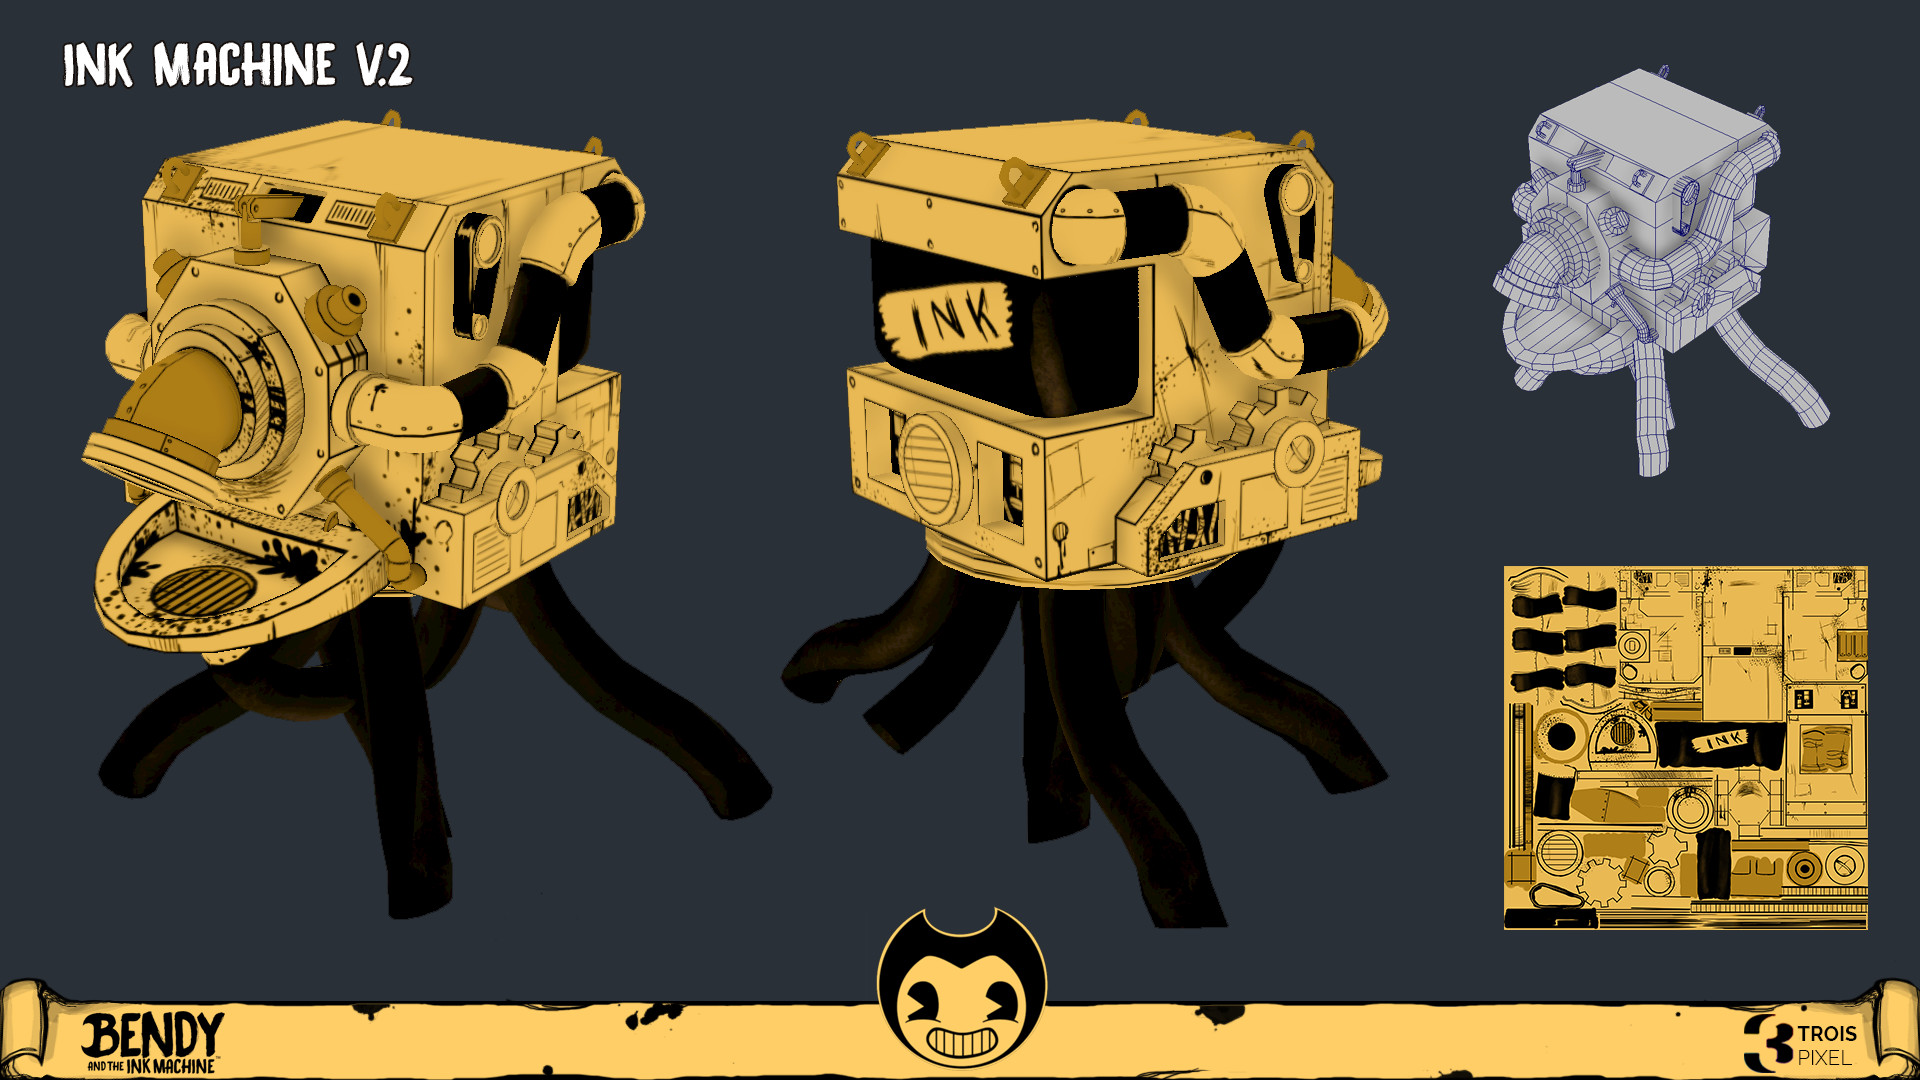 ArtStation - Bendy and the Ink Machine Chapter 1 Revamped Ink Machine, Trois Pixel